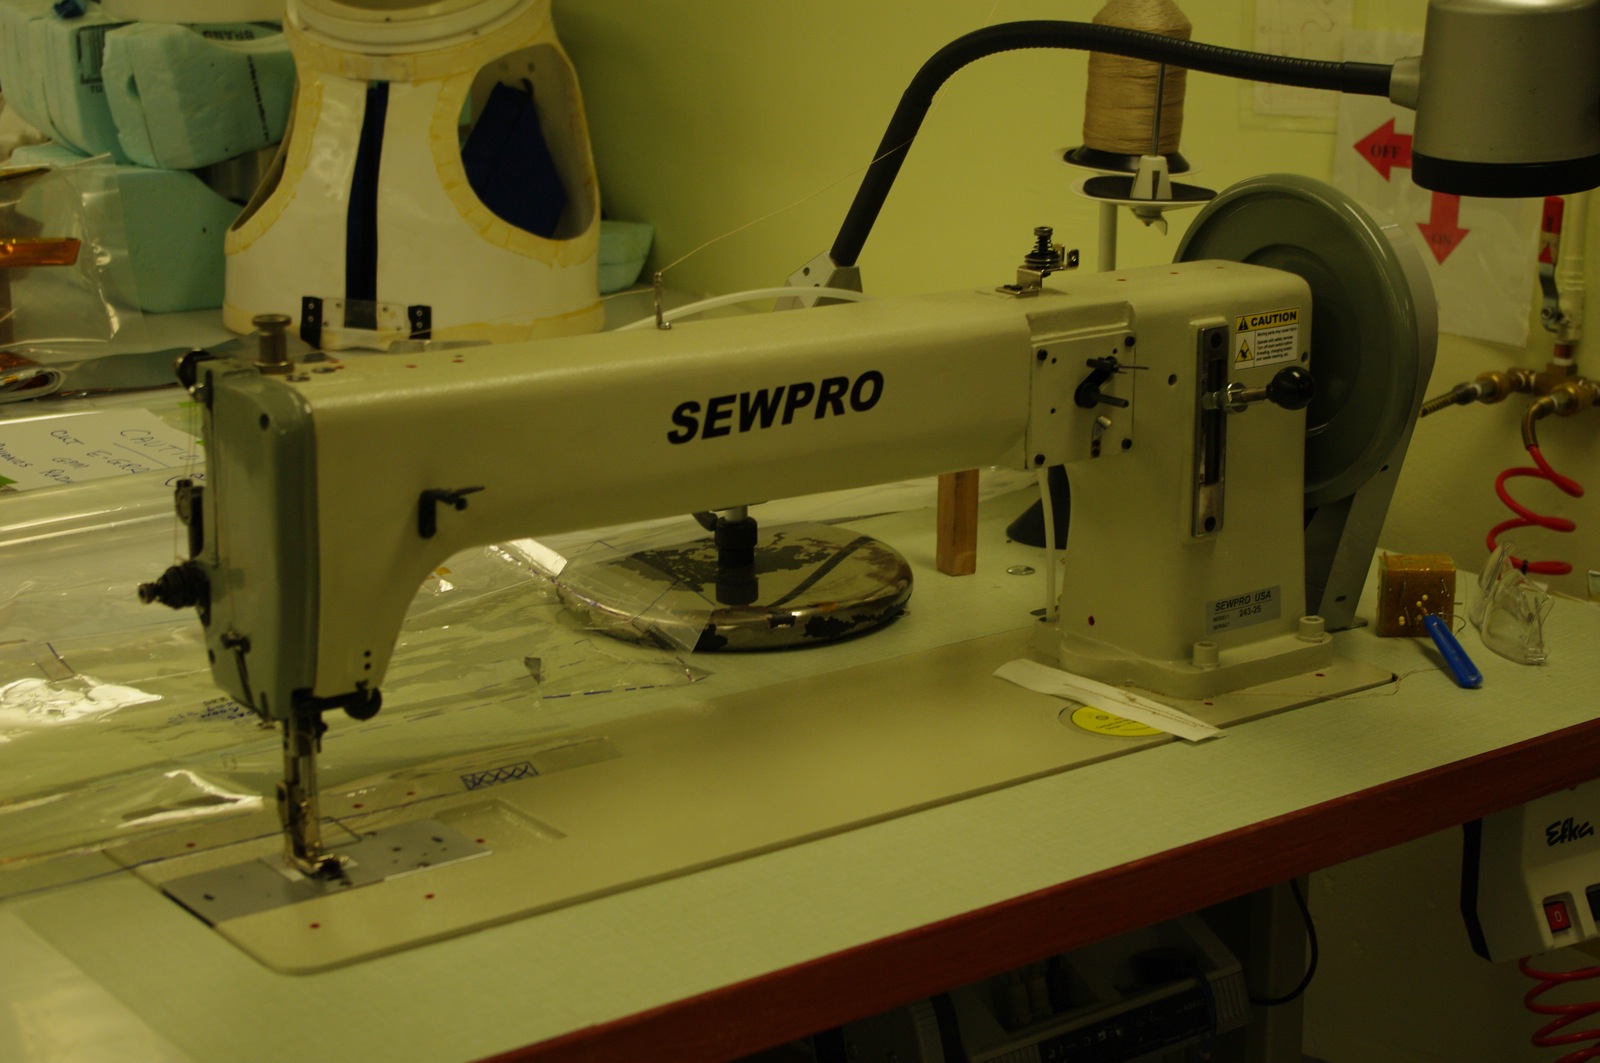 the sewing machine has the sewpro logo on it